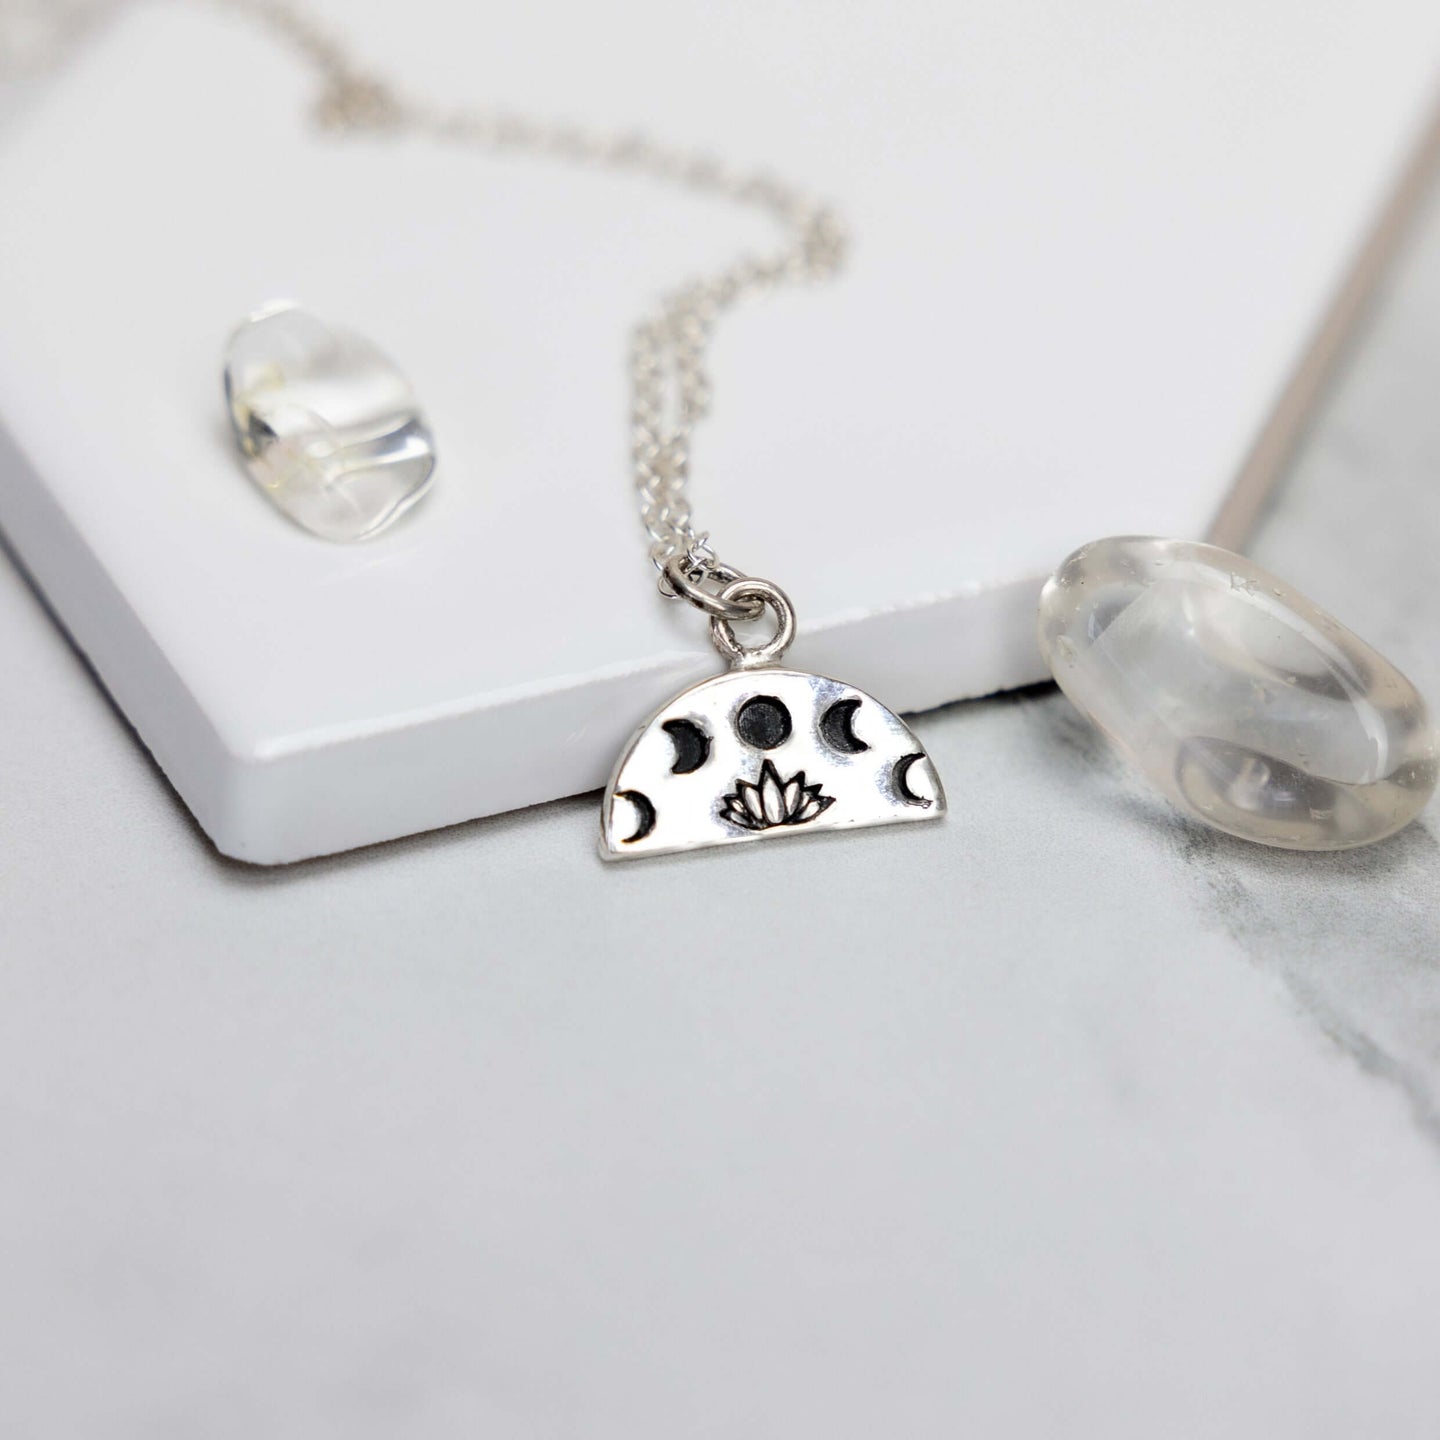 Olliebearboo Designs - Moon phases and lotus necklace